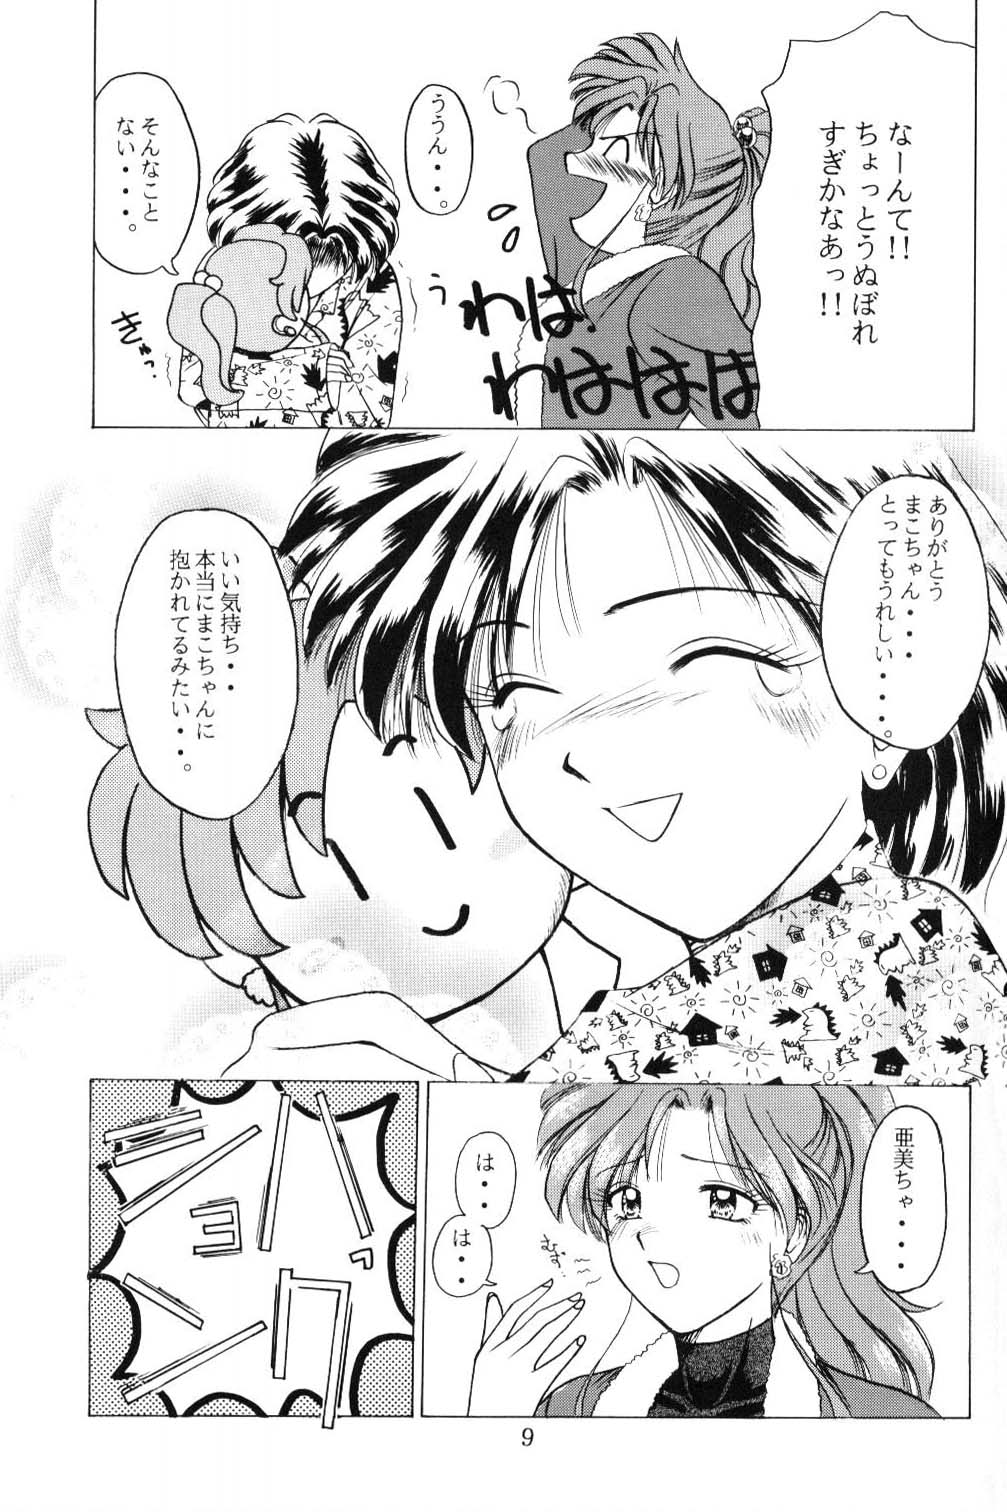 (C51) [T-press (ToWeR)] The only thing I need is U (Bishoujo Senshi Sailor Moon) page 8 full